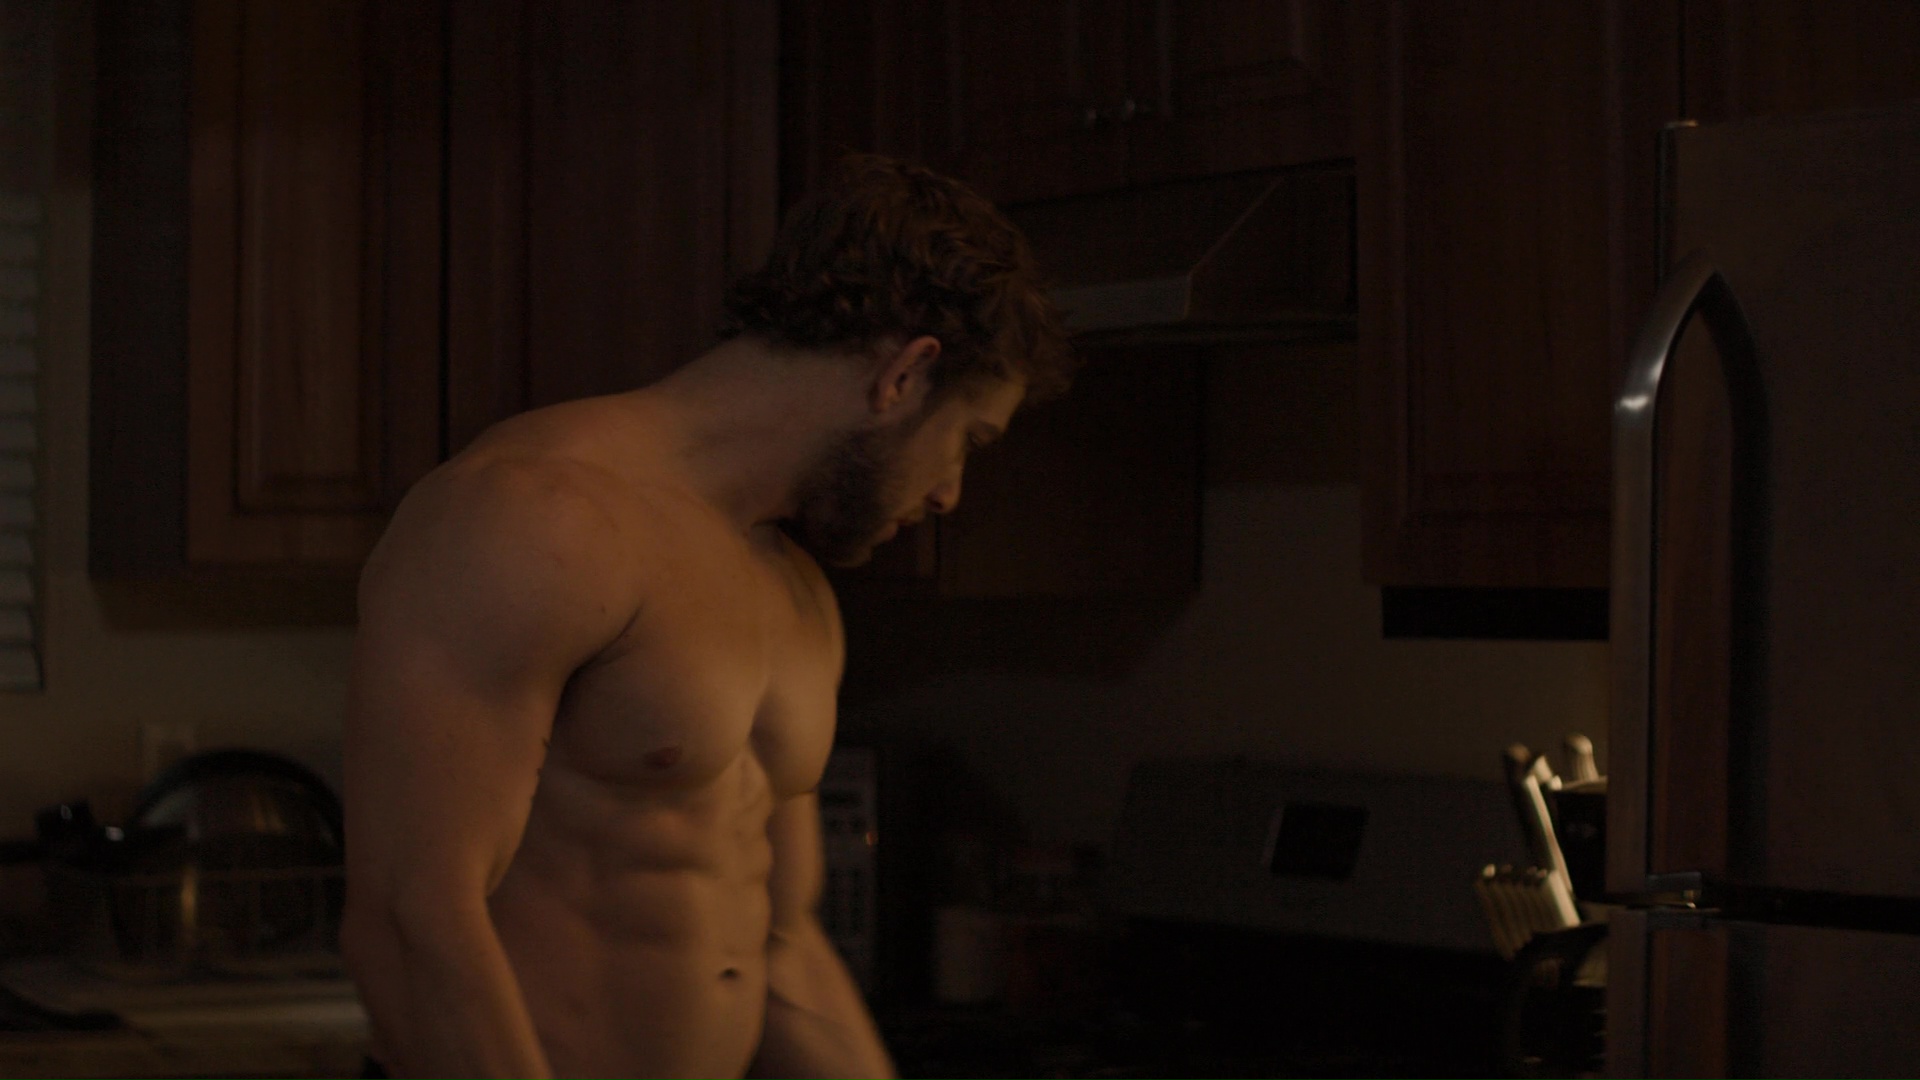 Max Thieriot Shirtless.